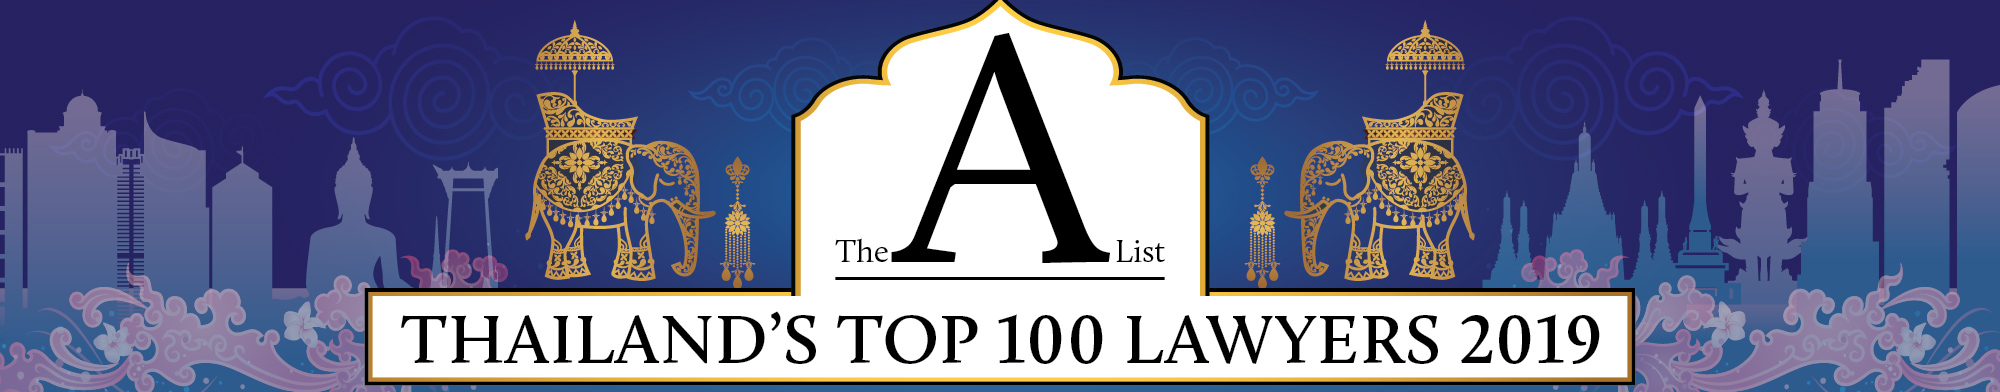 Thailand's top 100 lawyers 2019 - The A-List cover photo